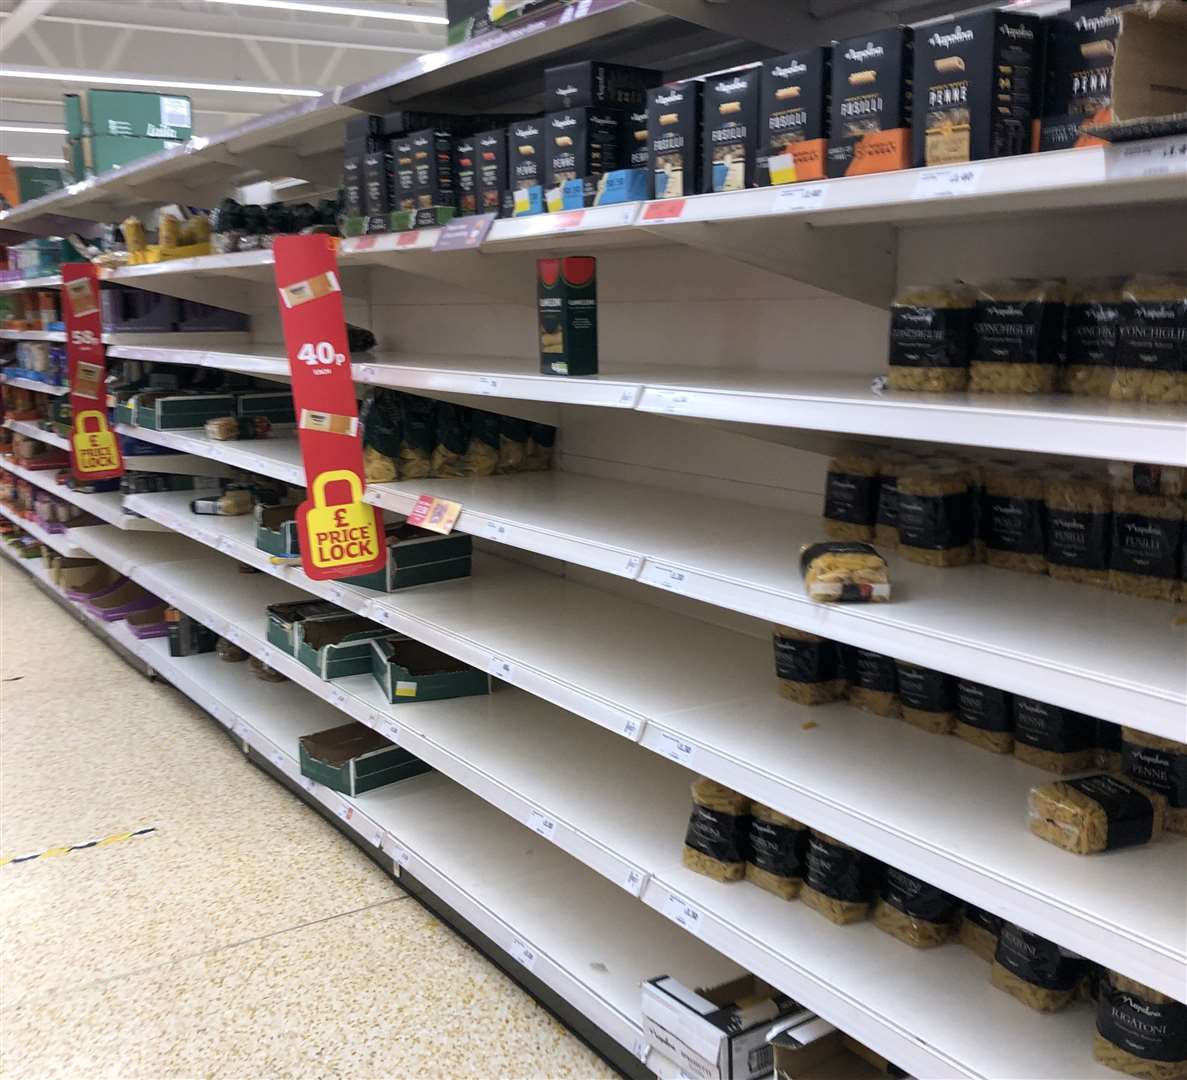 Stock was low in Sainsbury's in Pepper Hill, Gravesend